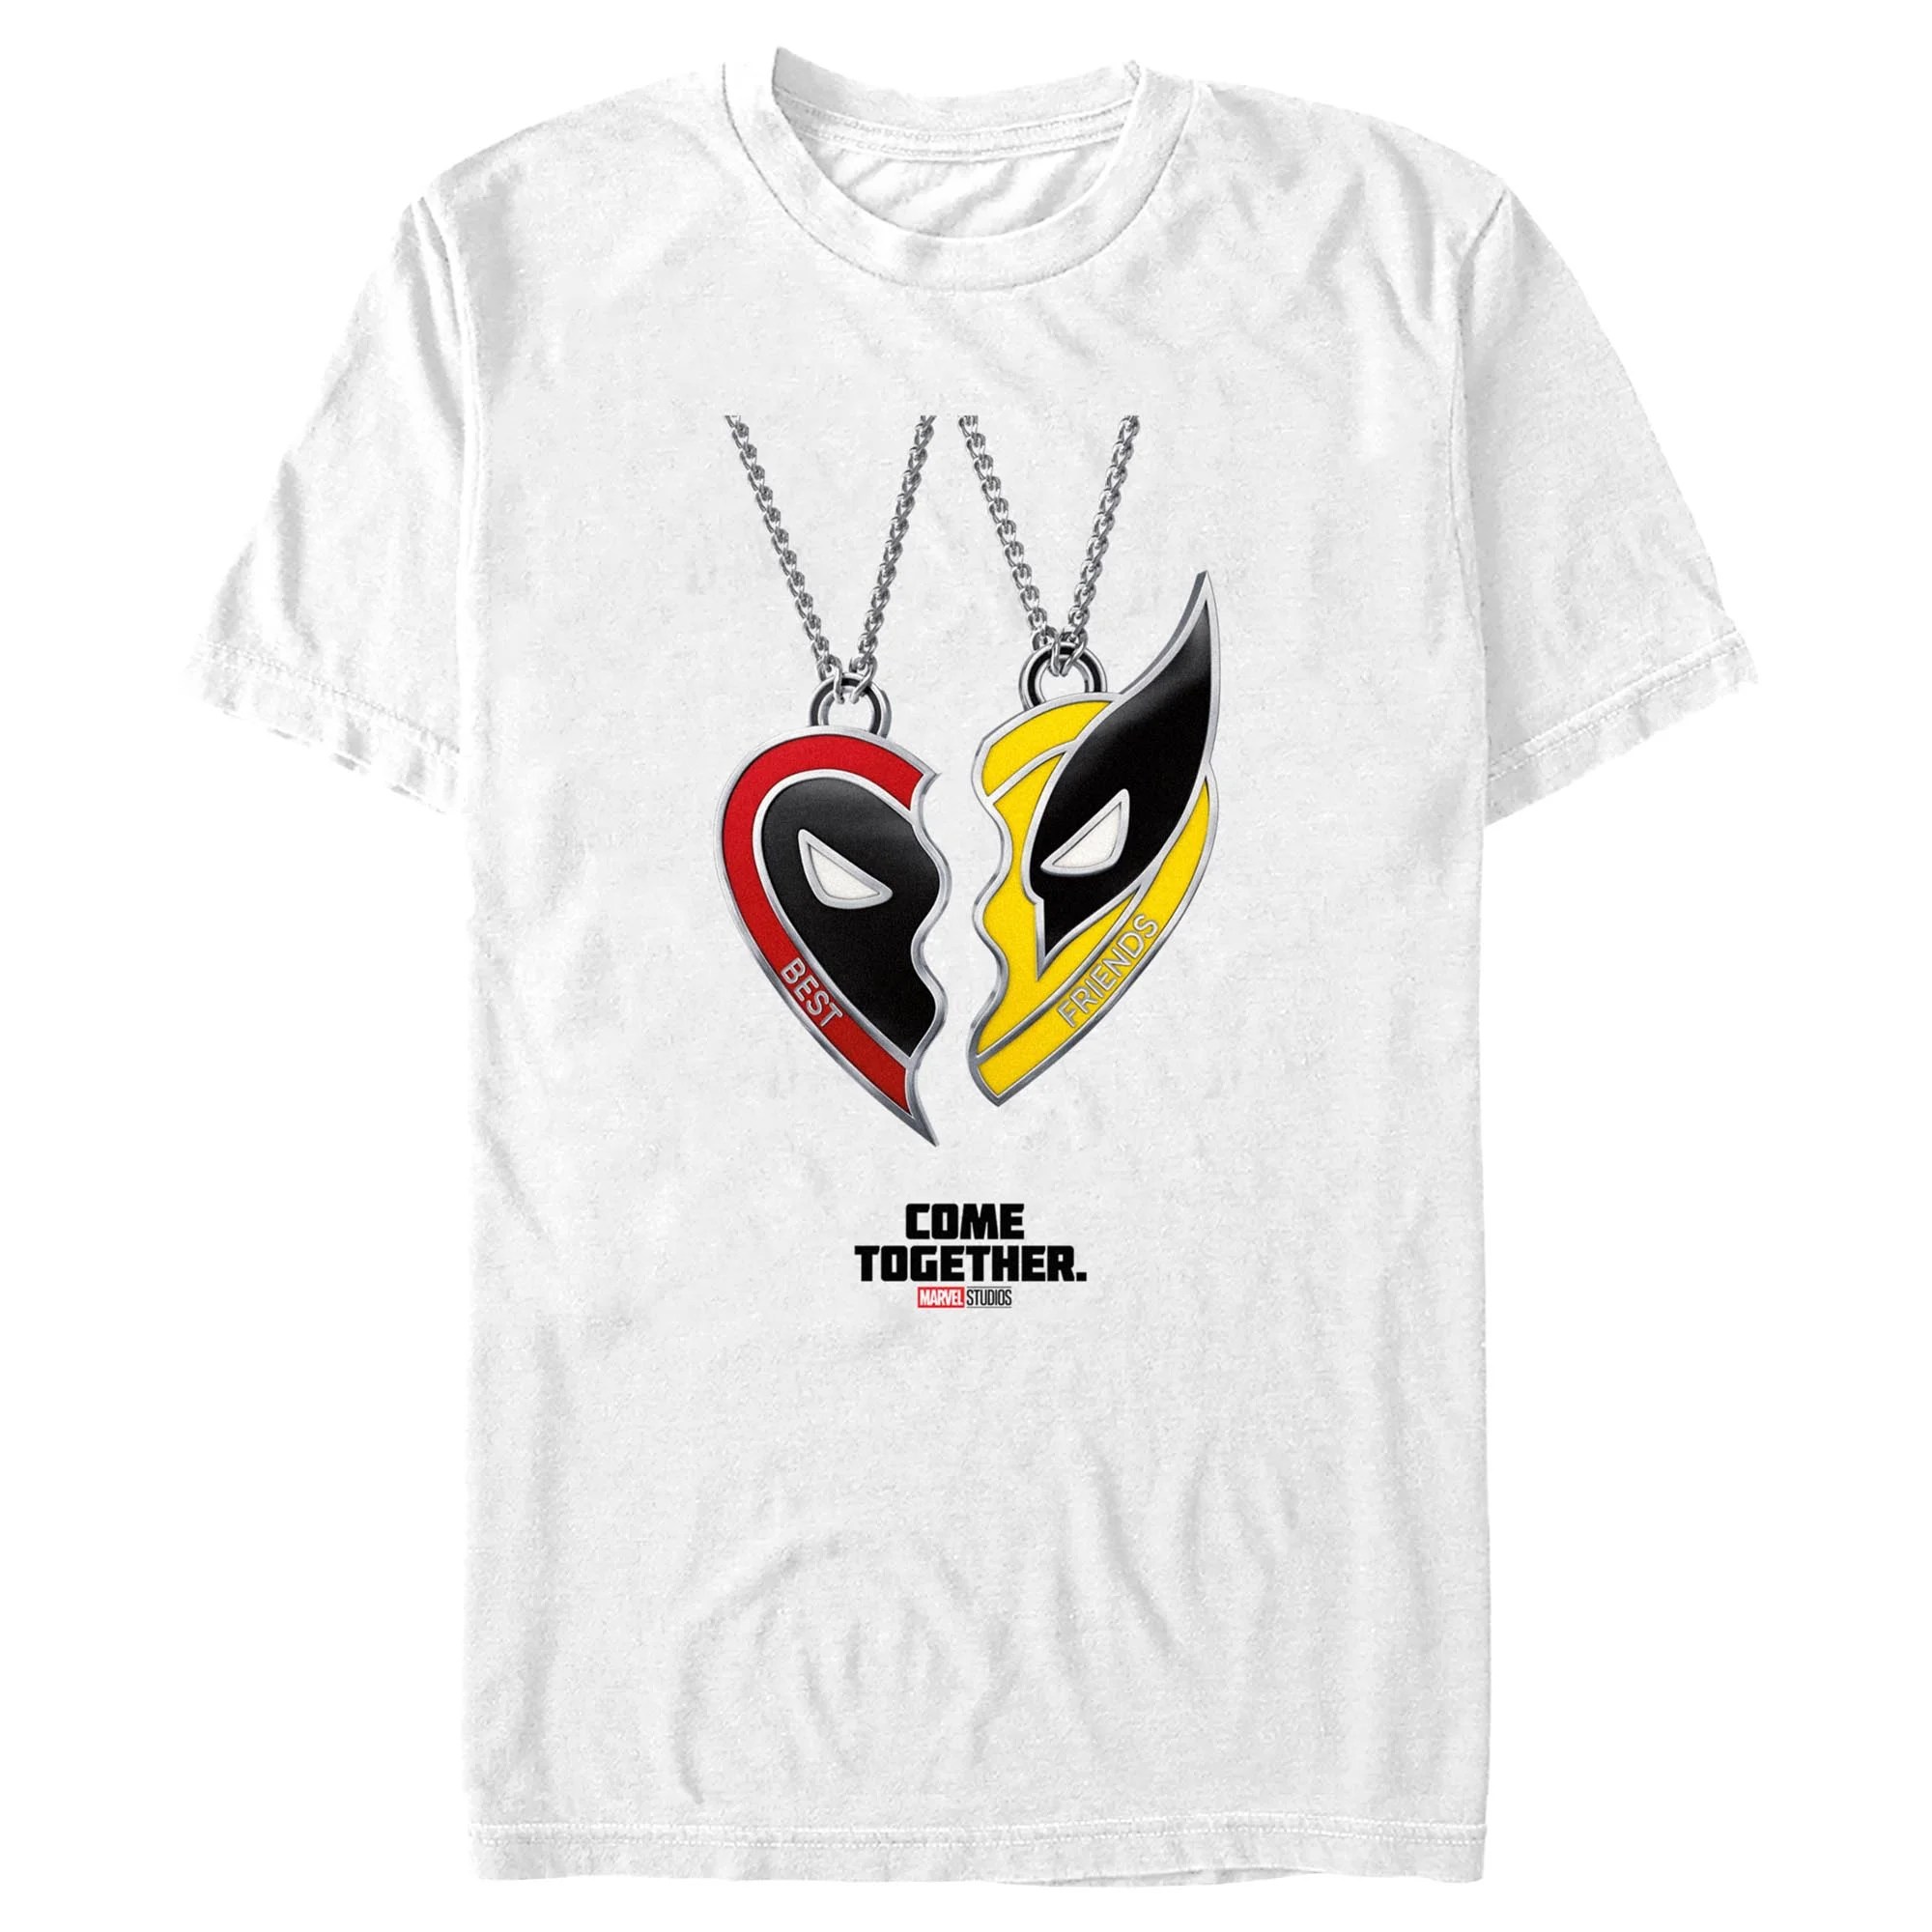 Deadpool and Wolverine's white graphic tee.